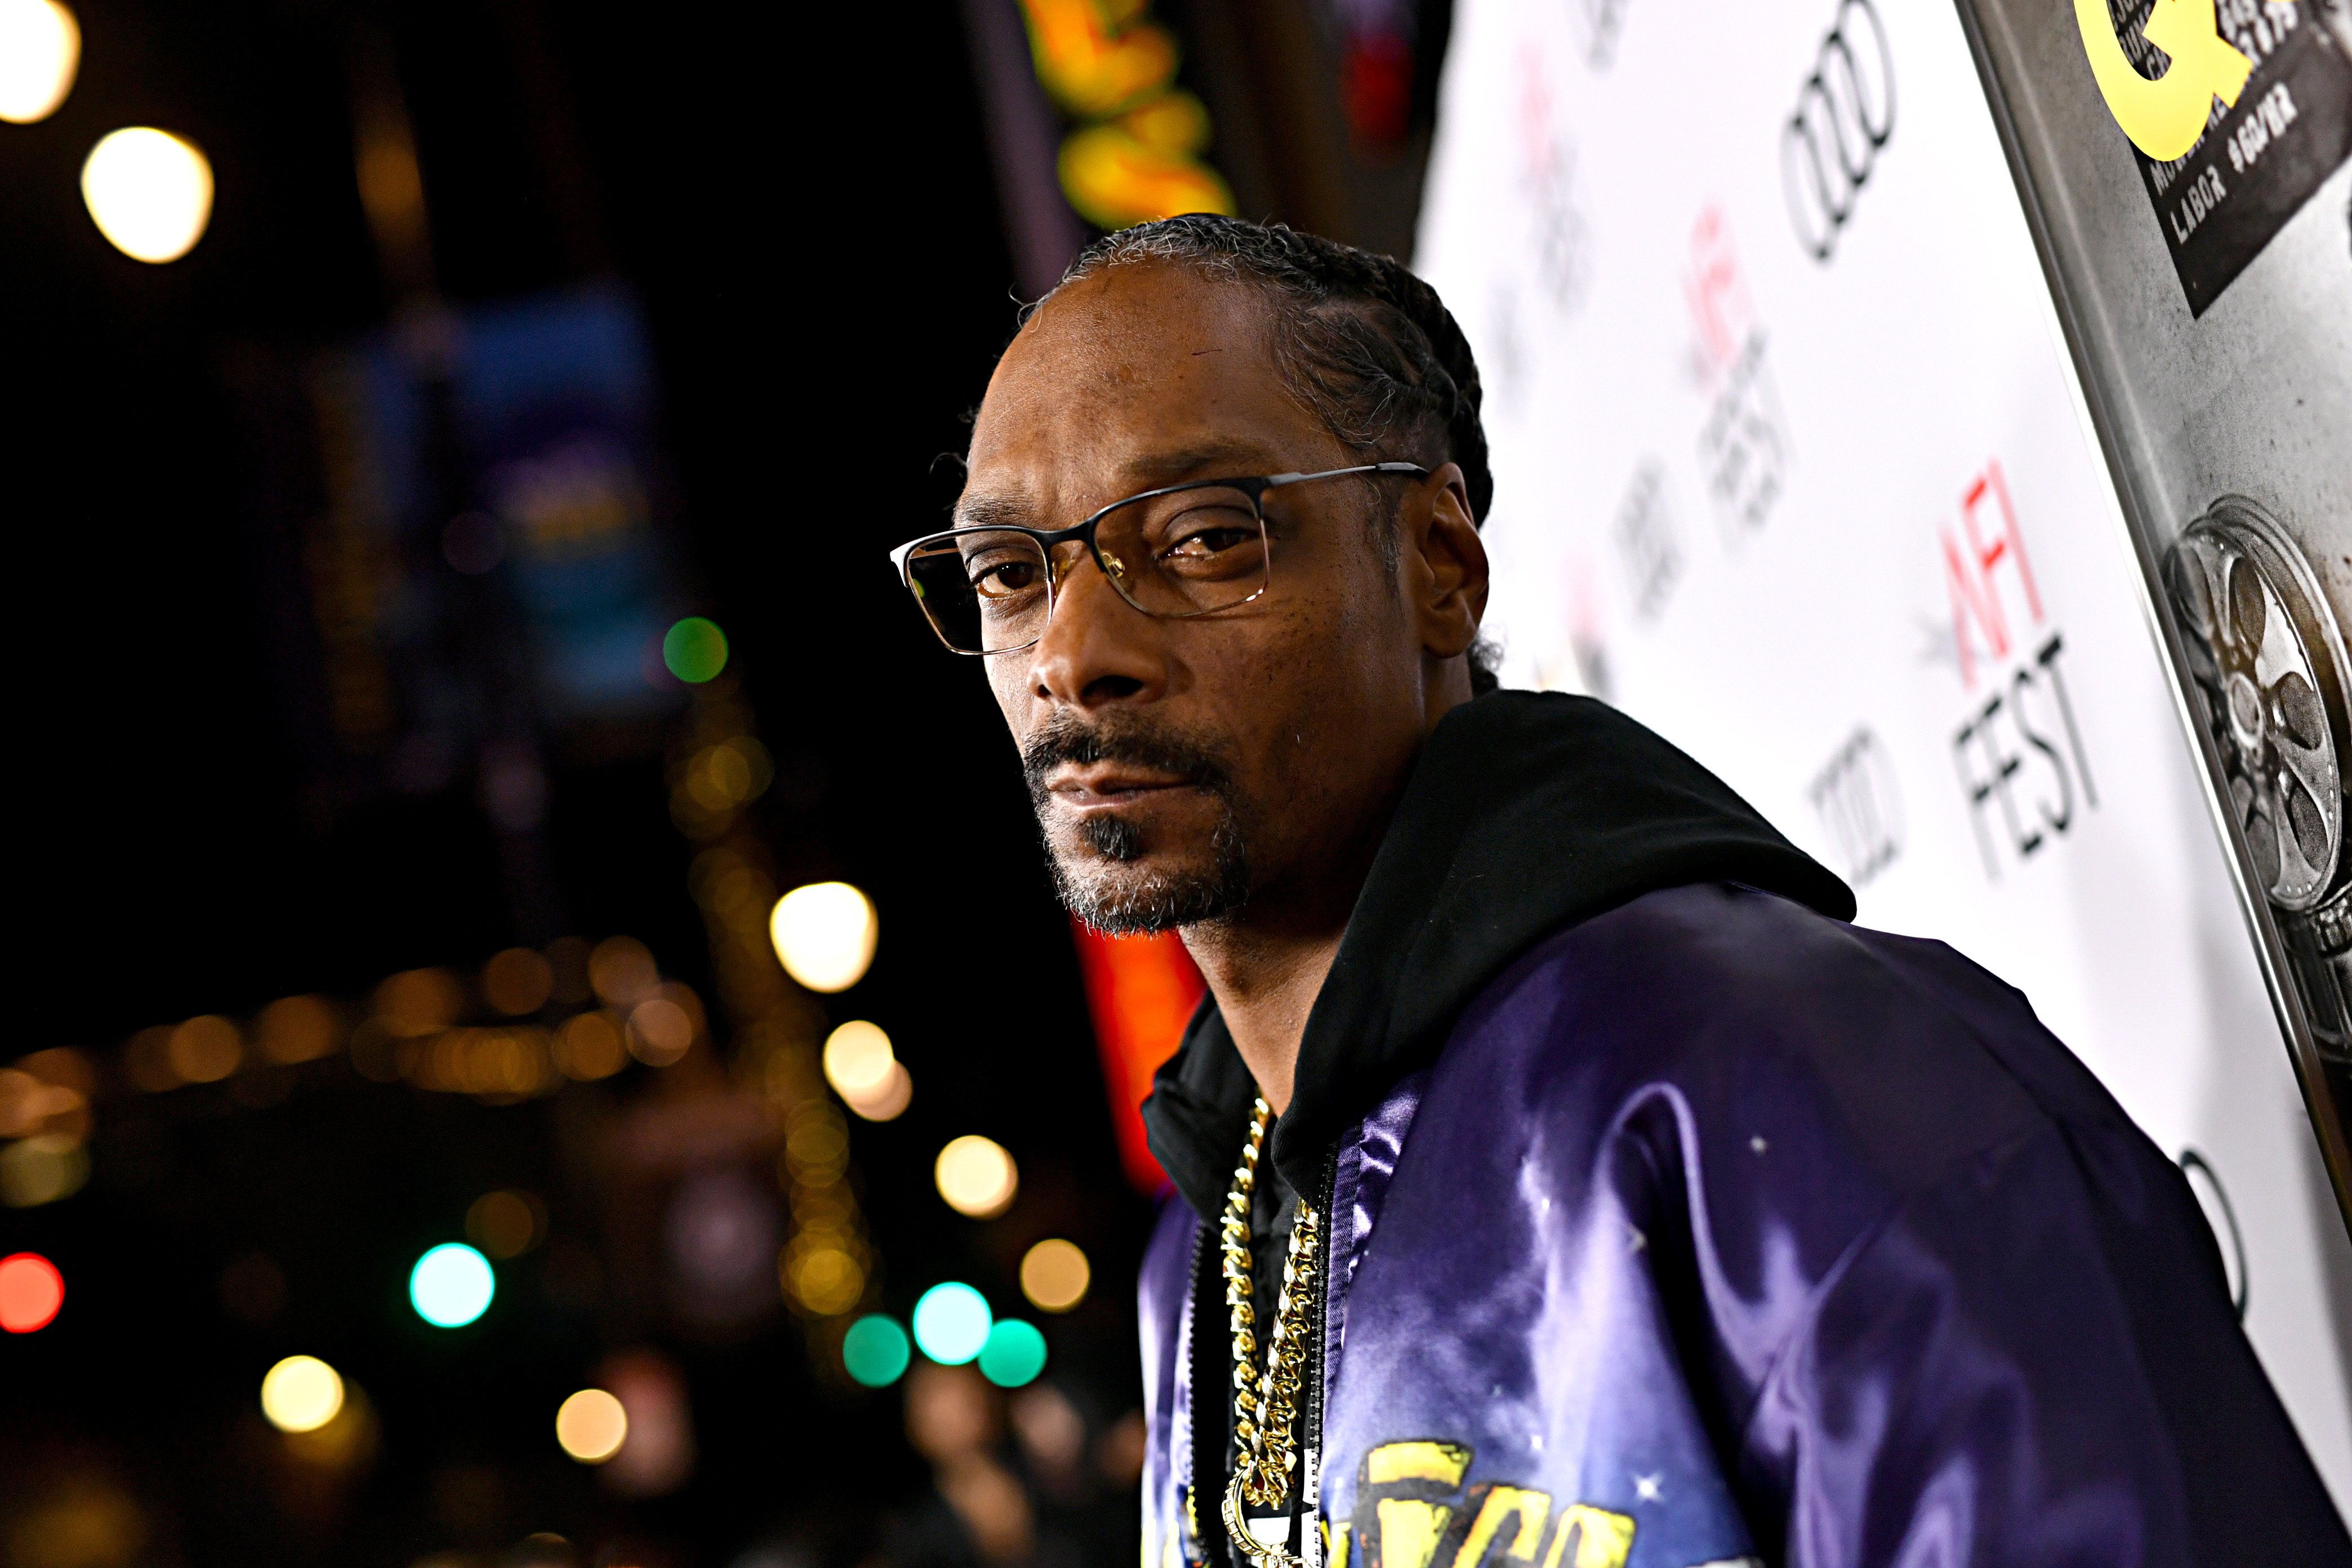 Snoop Dogg at the "Queen & Slim" premiere at the TCL Chinese Theatre on November 14, 2019 in Hollywood, California. | Photo: Getty Images